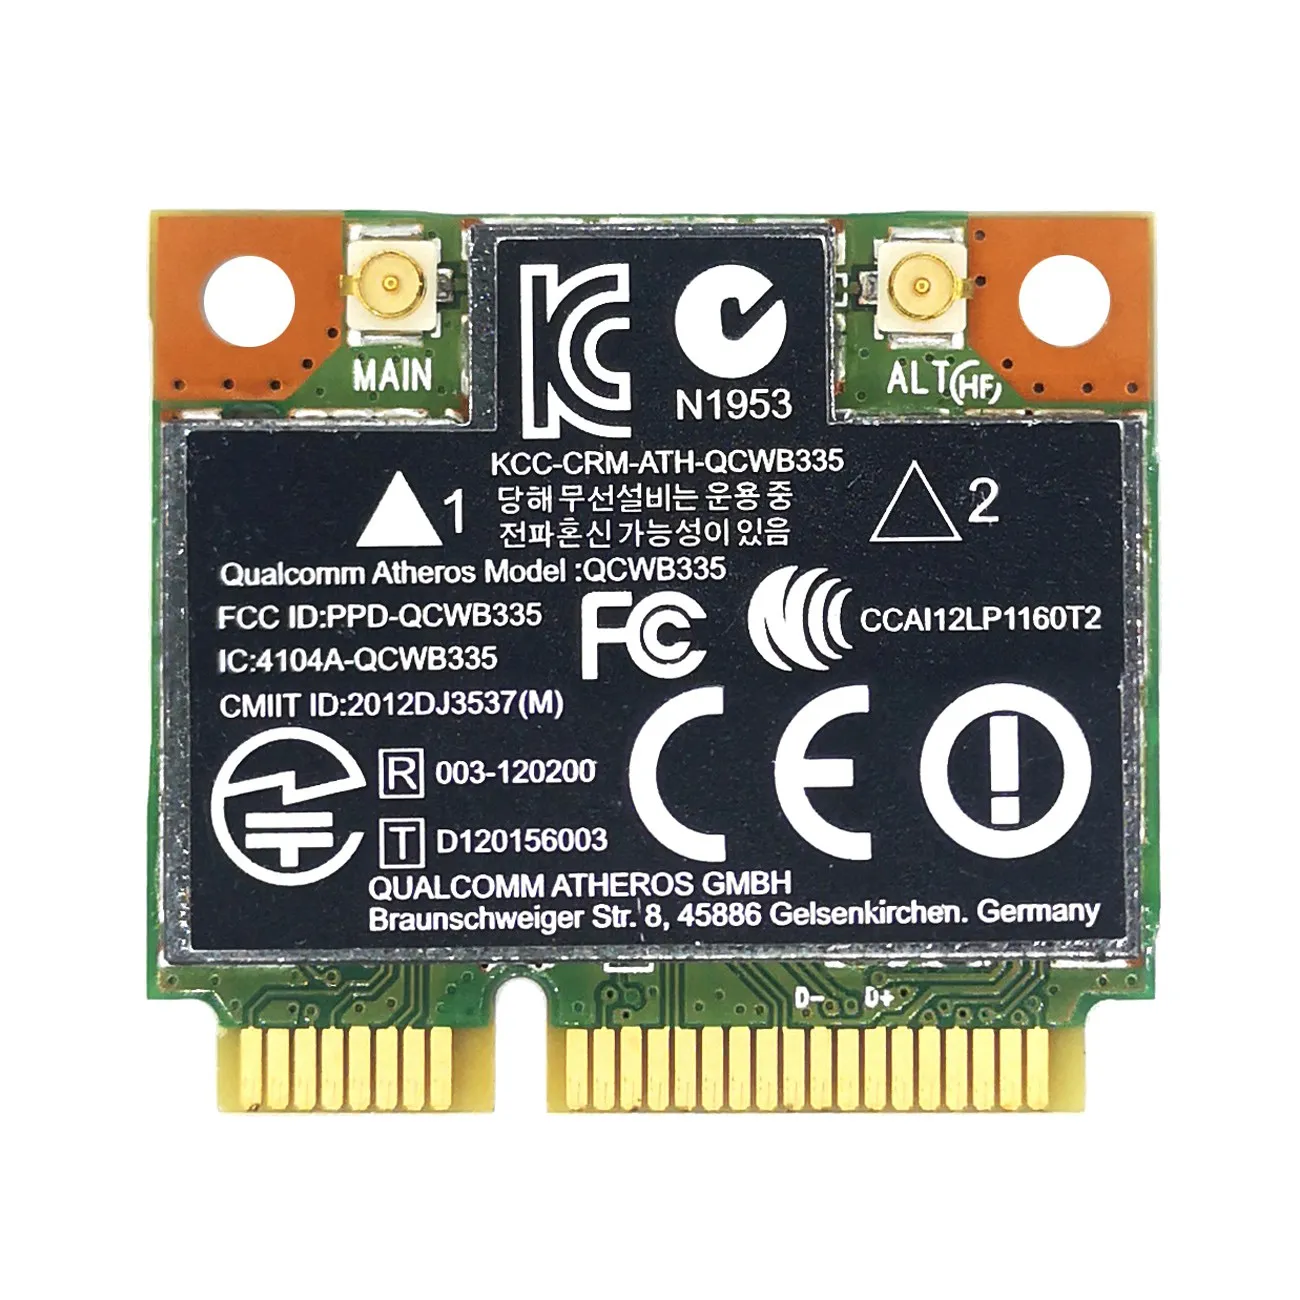 

AR9565 WiFi Card QCWB335 Mini PCIE Bluetooth 4.0 150Mbps 2.4G for XP Win7 Win8 Linux System